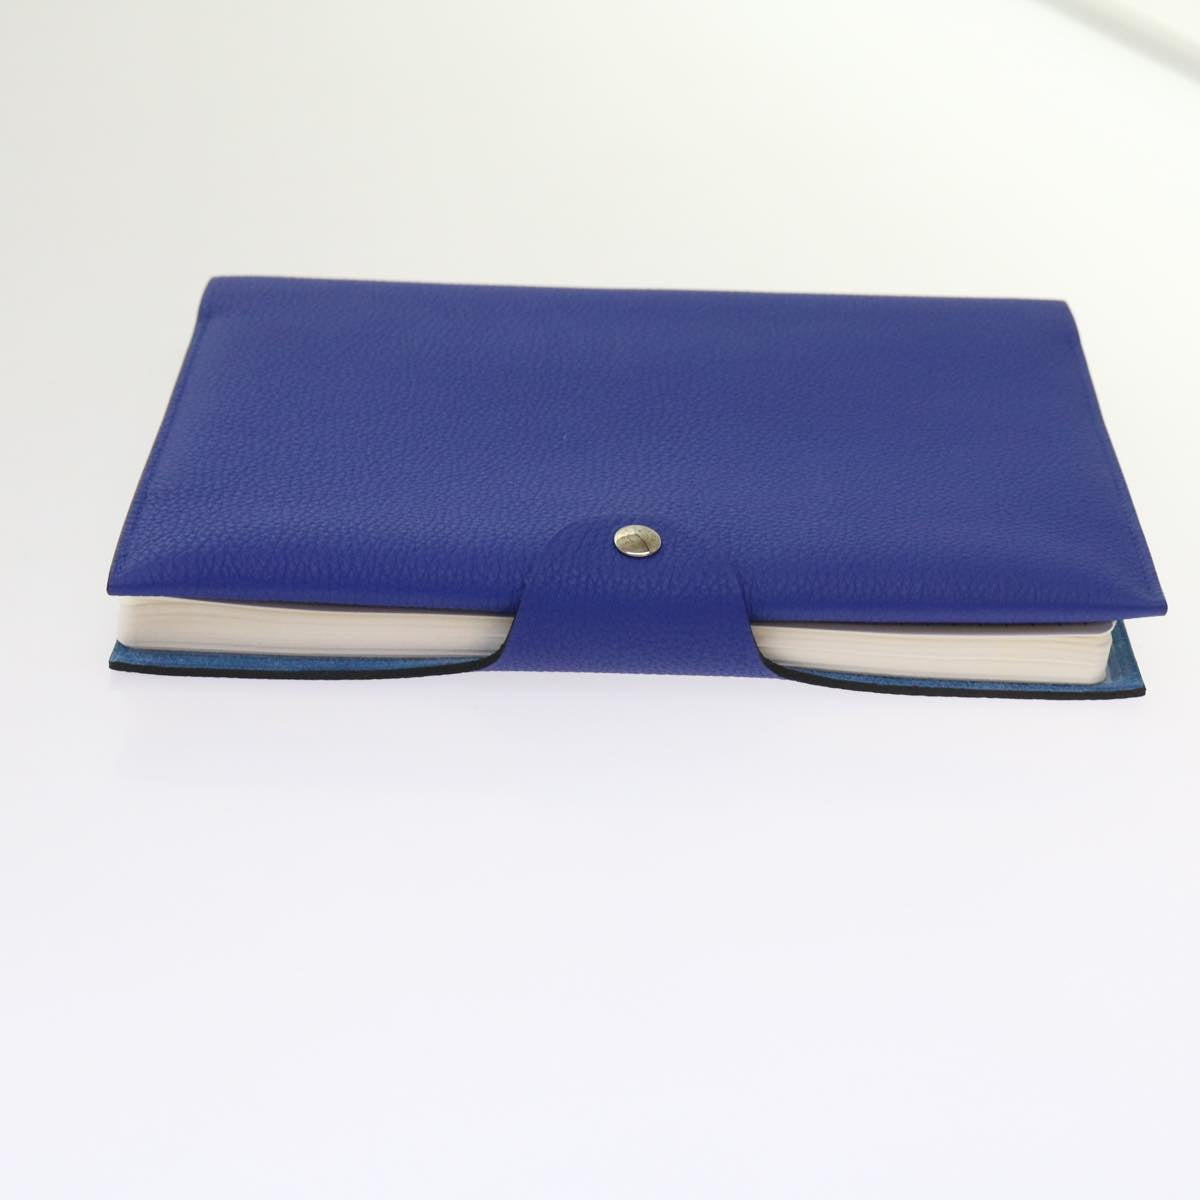 HERMES Uris Neo MM Day Planner Cover Leather Blue Auth 61676A